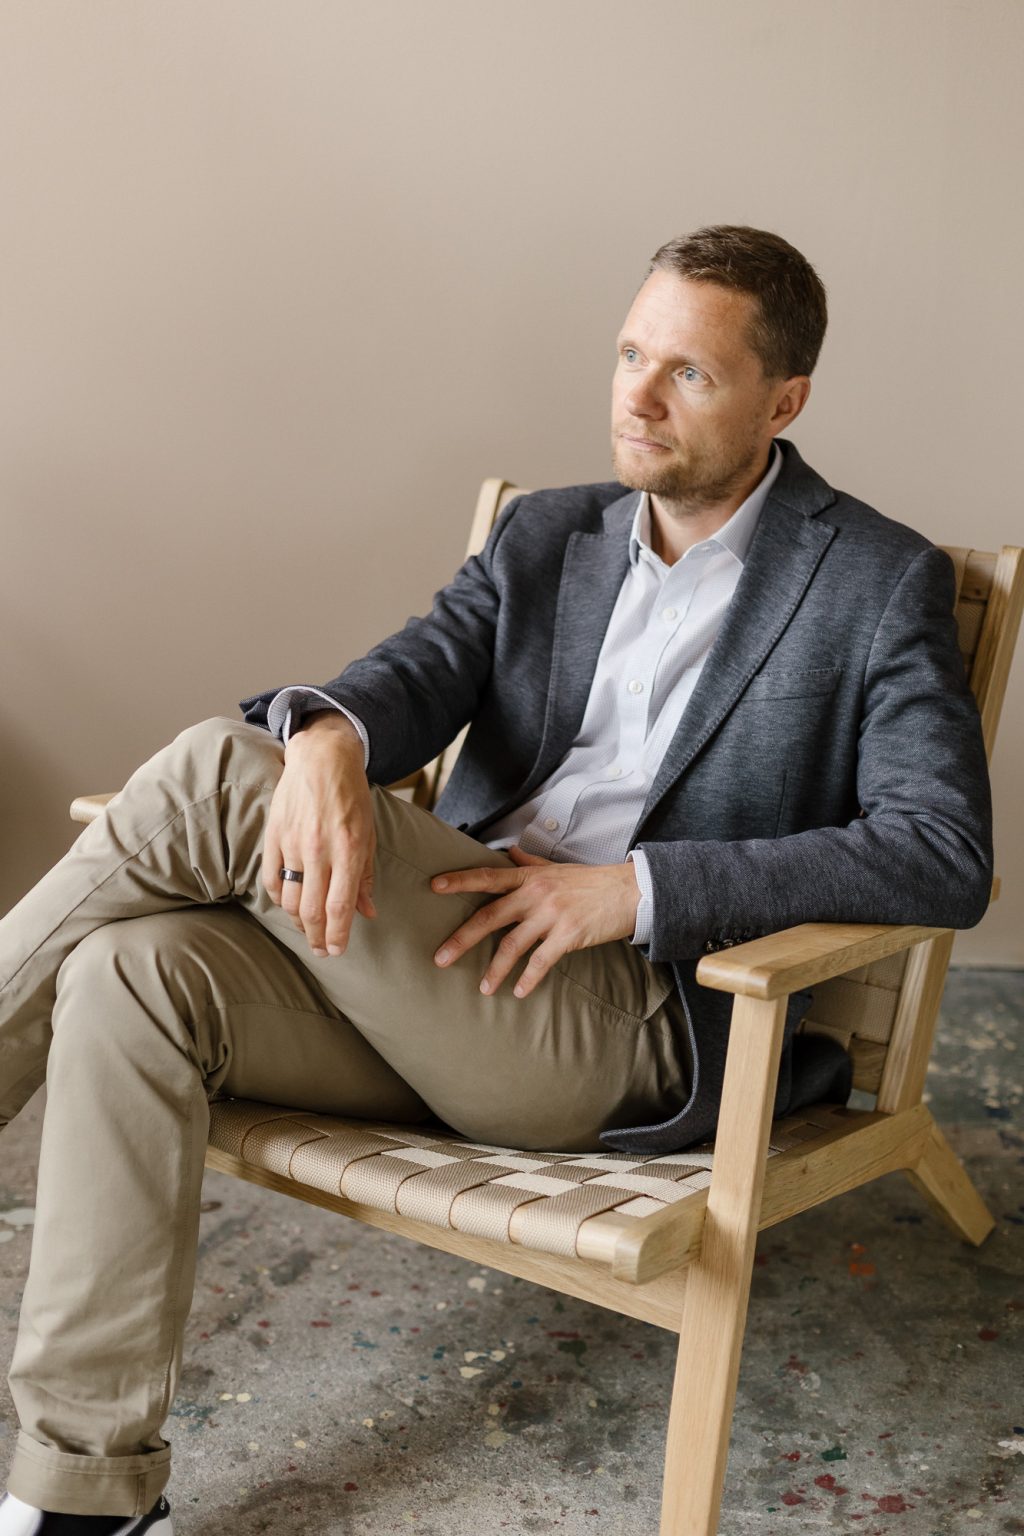 Picture of Artome's account manager Janne Orava sitting on the chair.